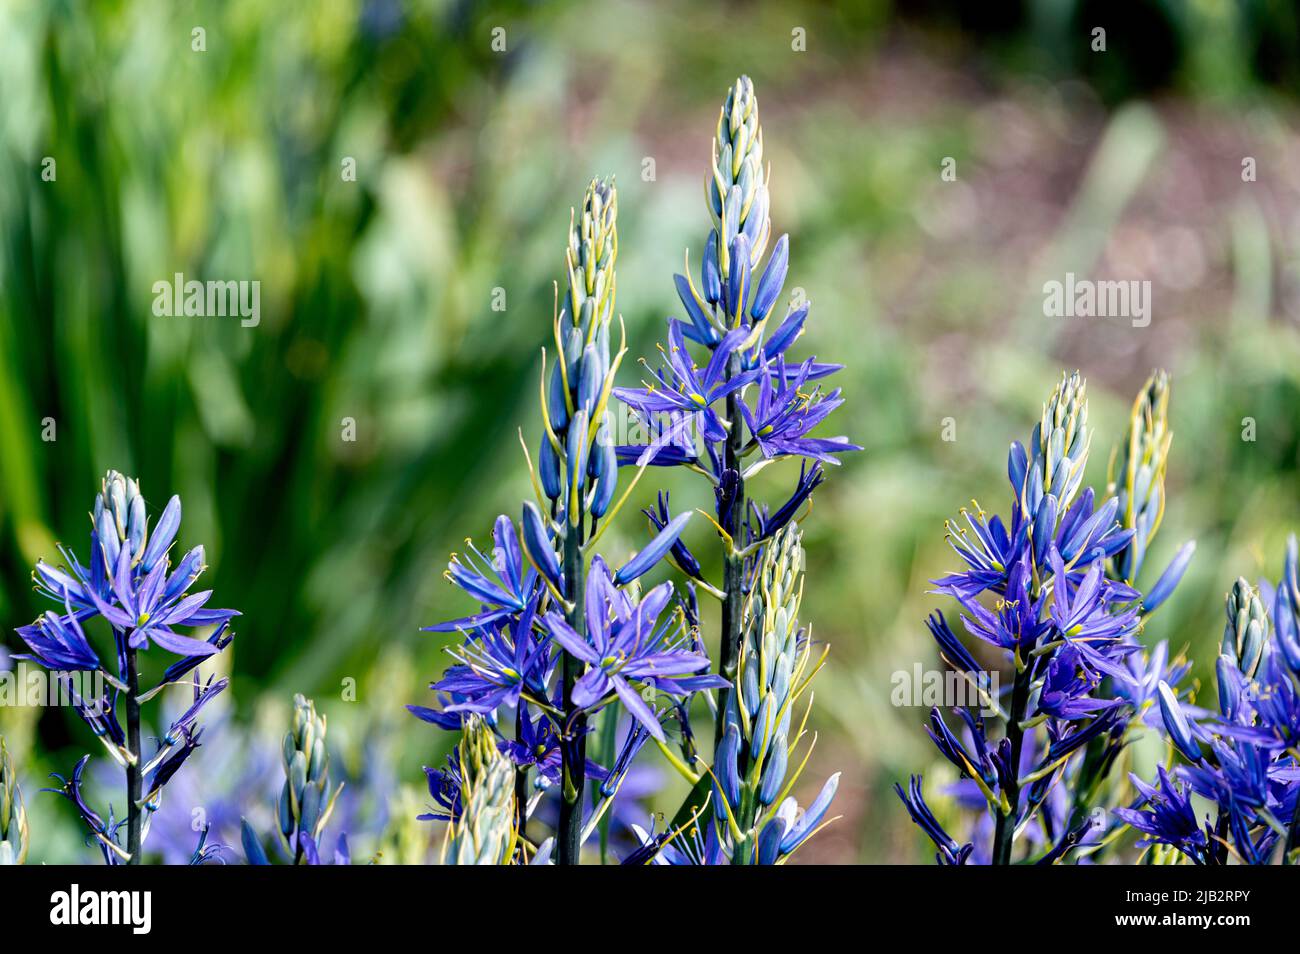 camassia quamash, Asparagaceae., North American wild hyacinth, common camassia. Erect blue flower spikes in spring. Stock Photo